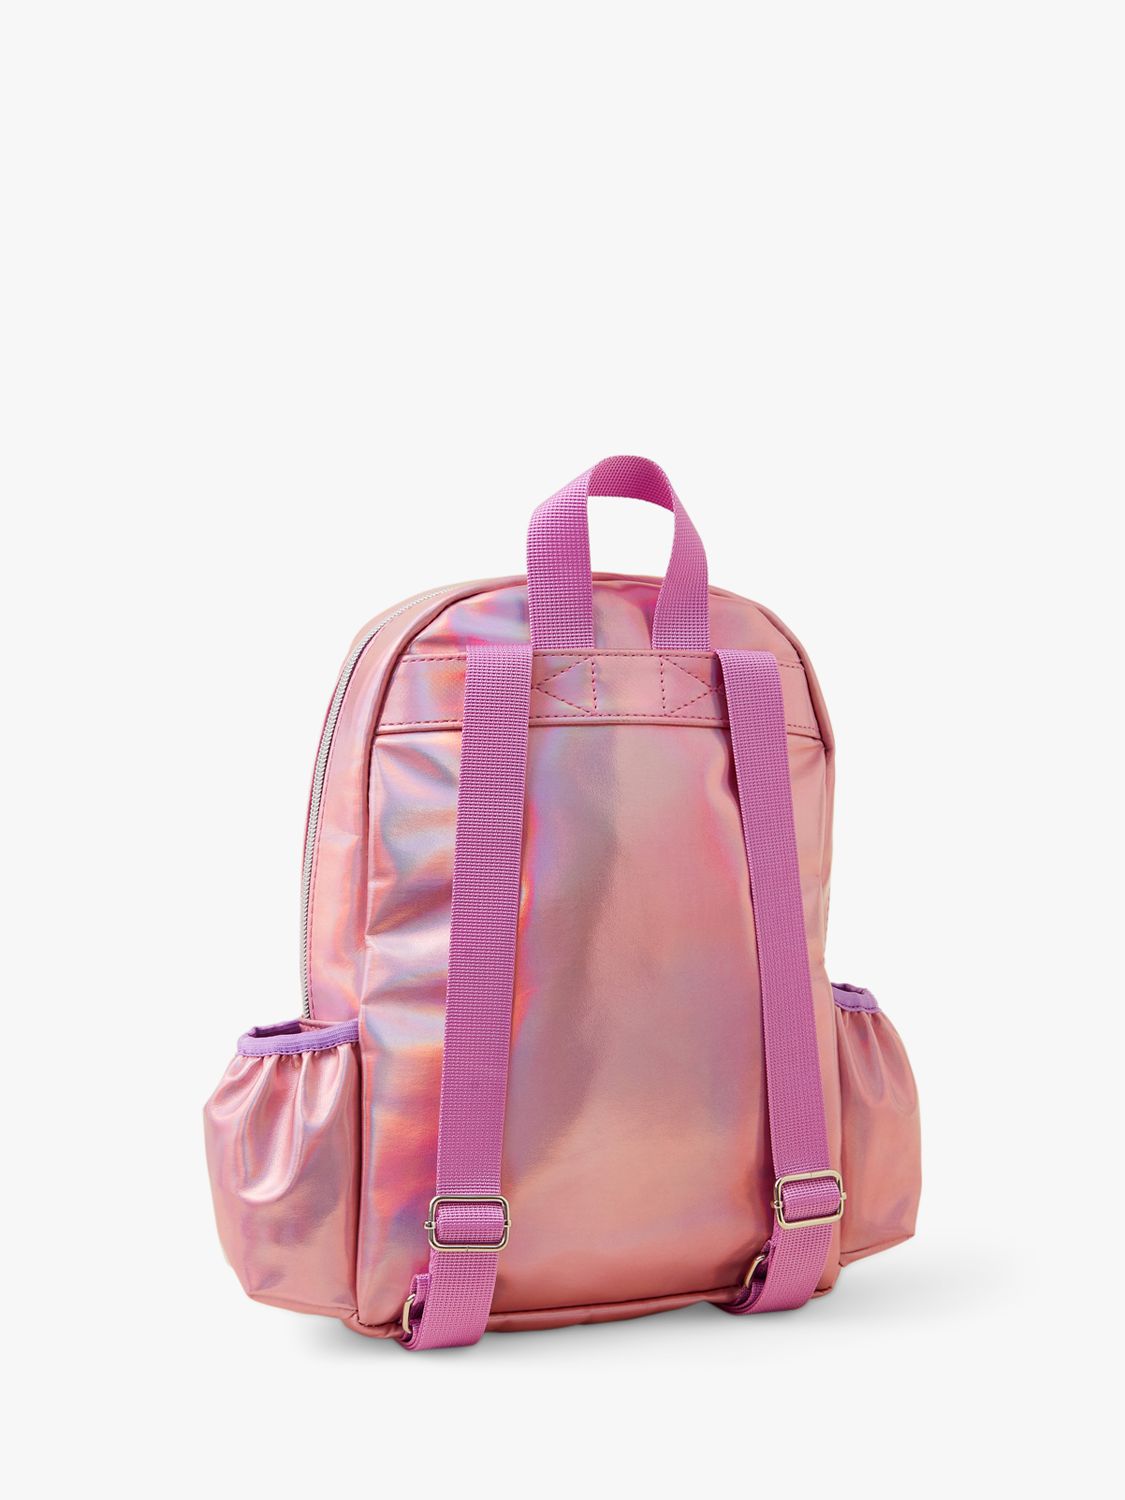 Buy Angels by Accessorize Kids' Sparkly Unicorn Backpack, Pink/Multi Online at johnlewis.com